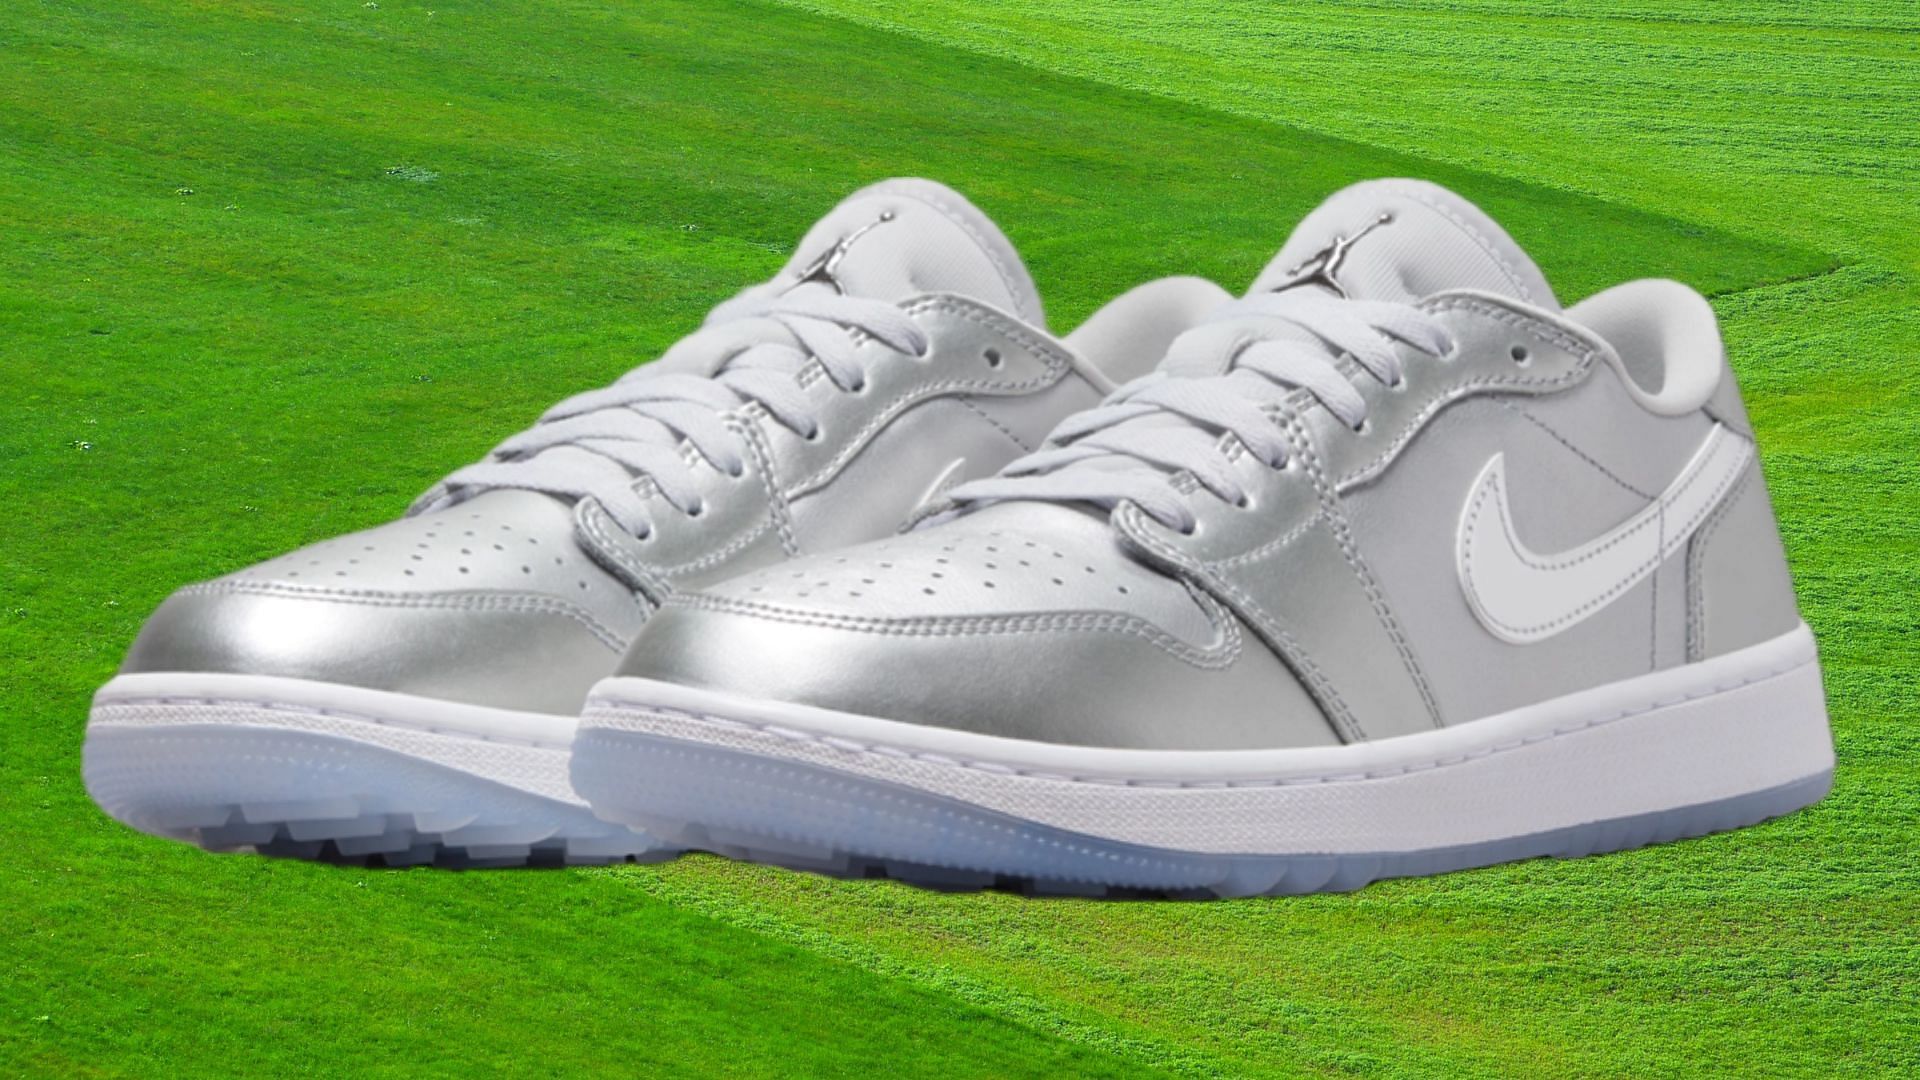 Nike: Air Jordan 1 Low Golf “Gift Giving” shoes: Where to get